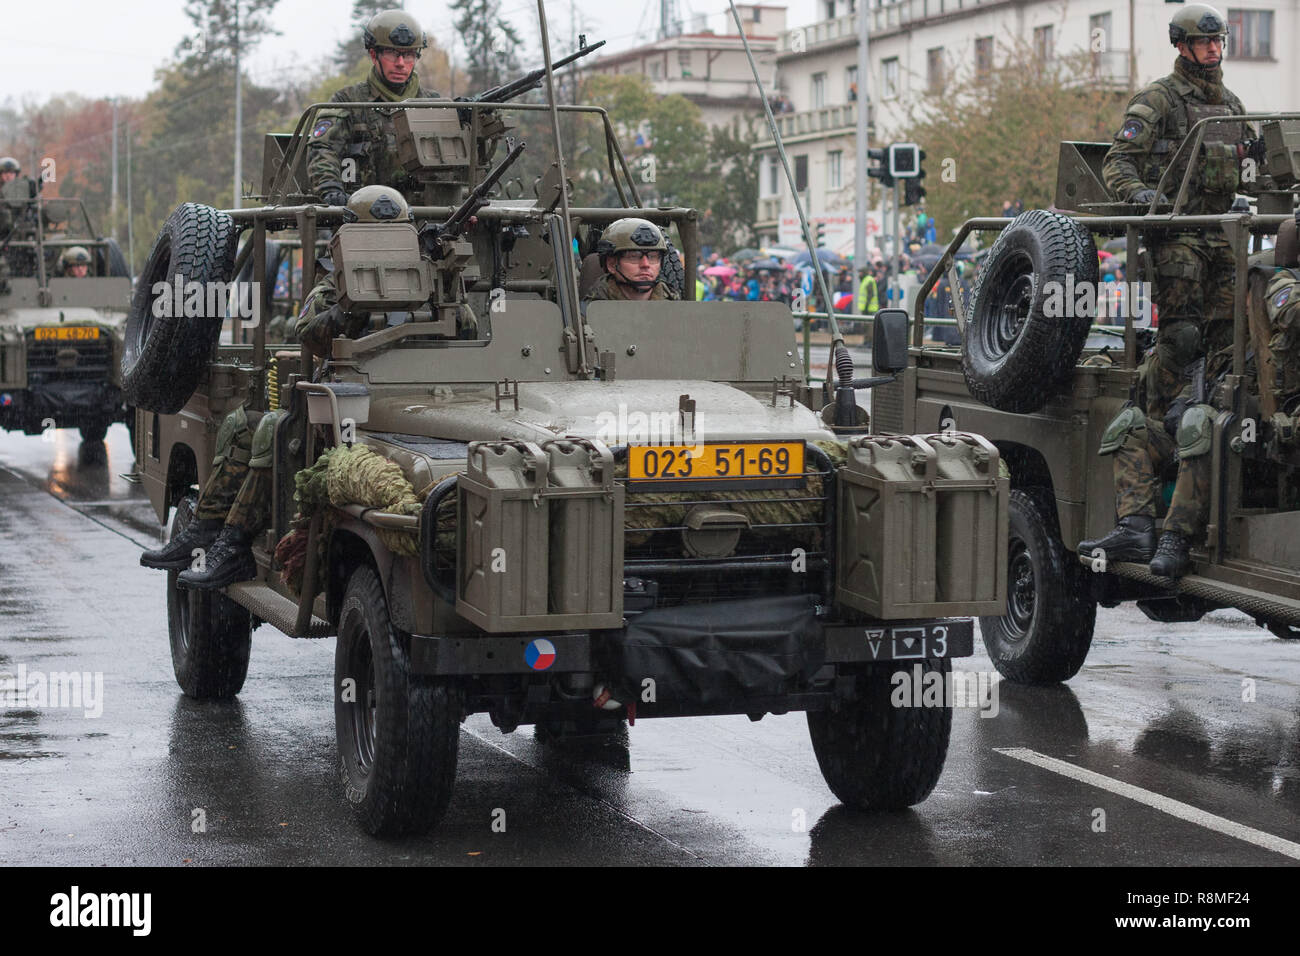 European street, Prague-October 28, 2018: Soldiers of Czech Army are riding Land Rover Defender cars  on military parade on October 28, 2018 in Prague Stock Photo